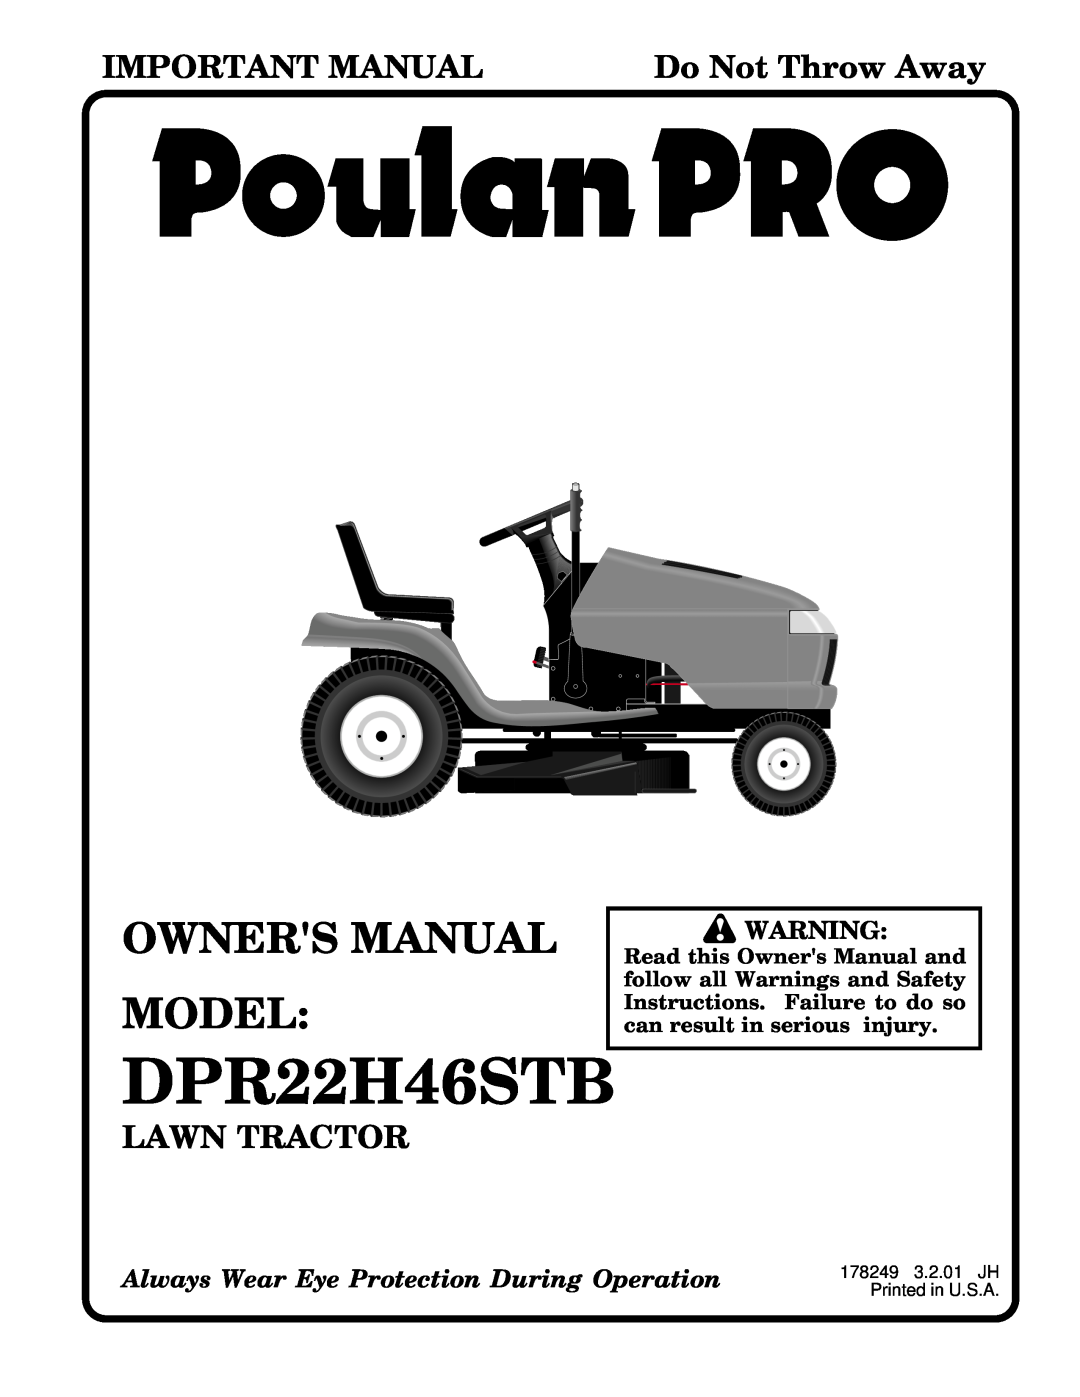 Poulan DPR22H46STB owner manual Owners Manual Model, Important Manual, Do Not Throw Away, Lawn Tractor 